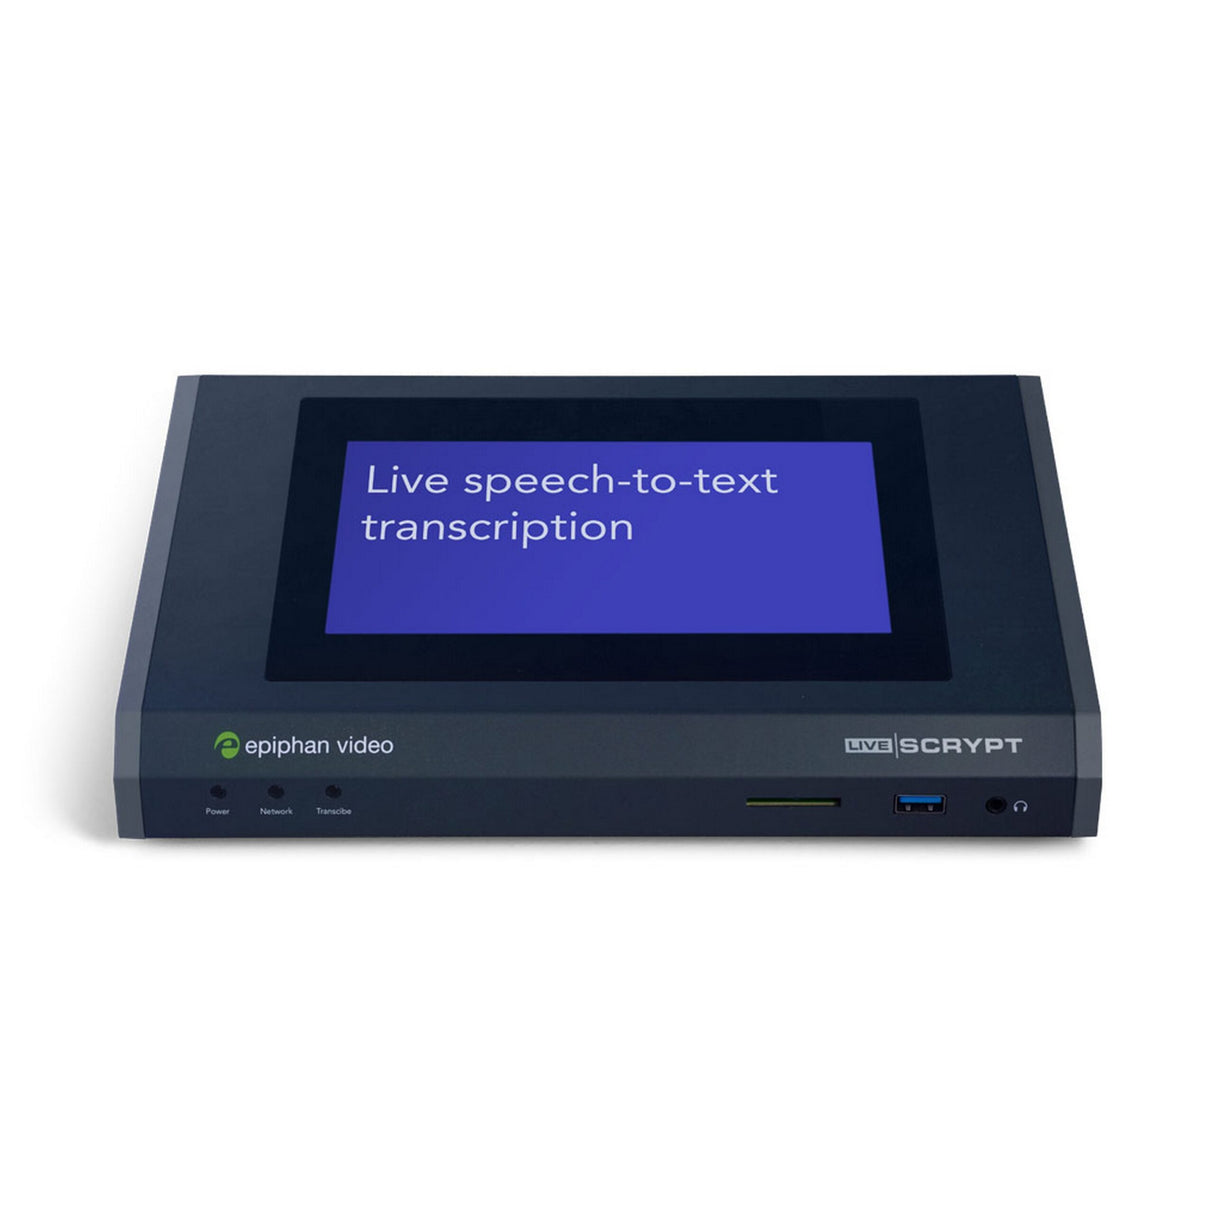 Epiphan LiveScrypt Real-Time Automatic Transcription